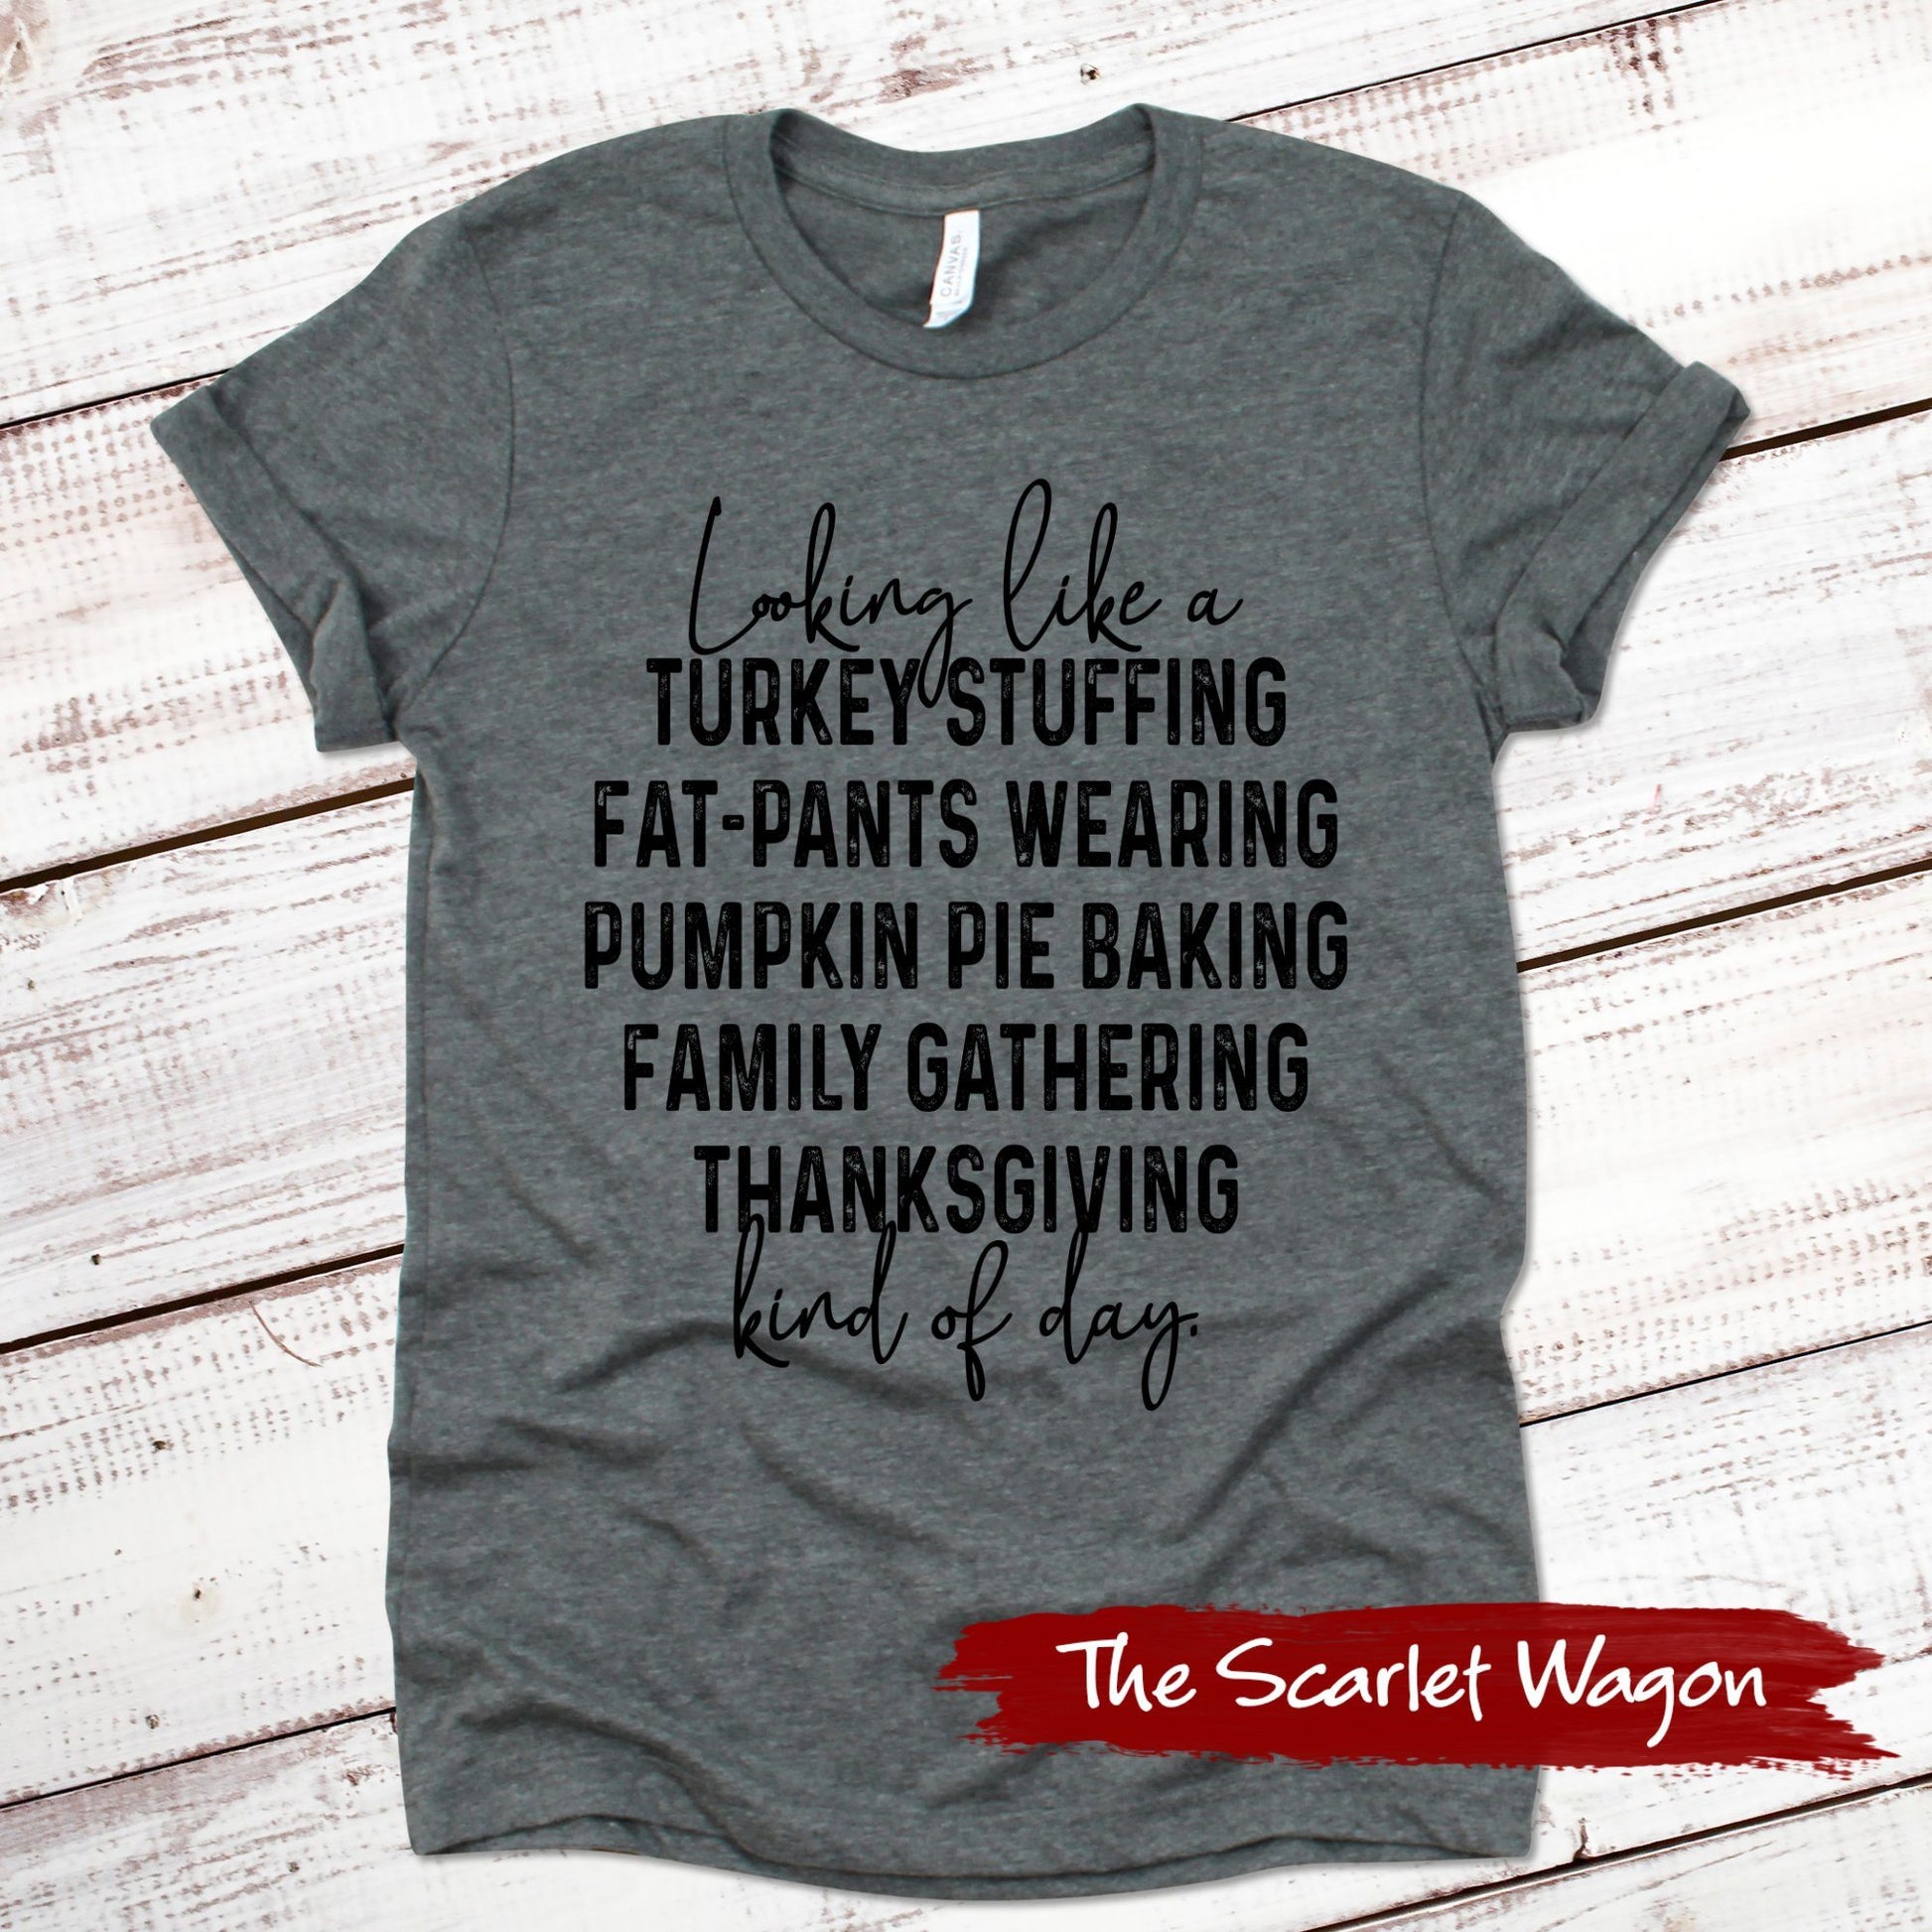 Thanksgiving Kind of Day Thanksgiving Shirt Scarlet Wagon Deep Heather Gray XS 